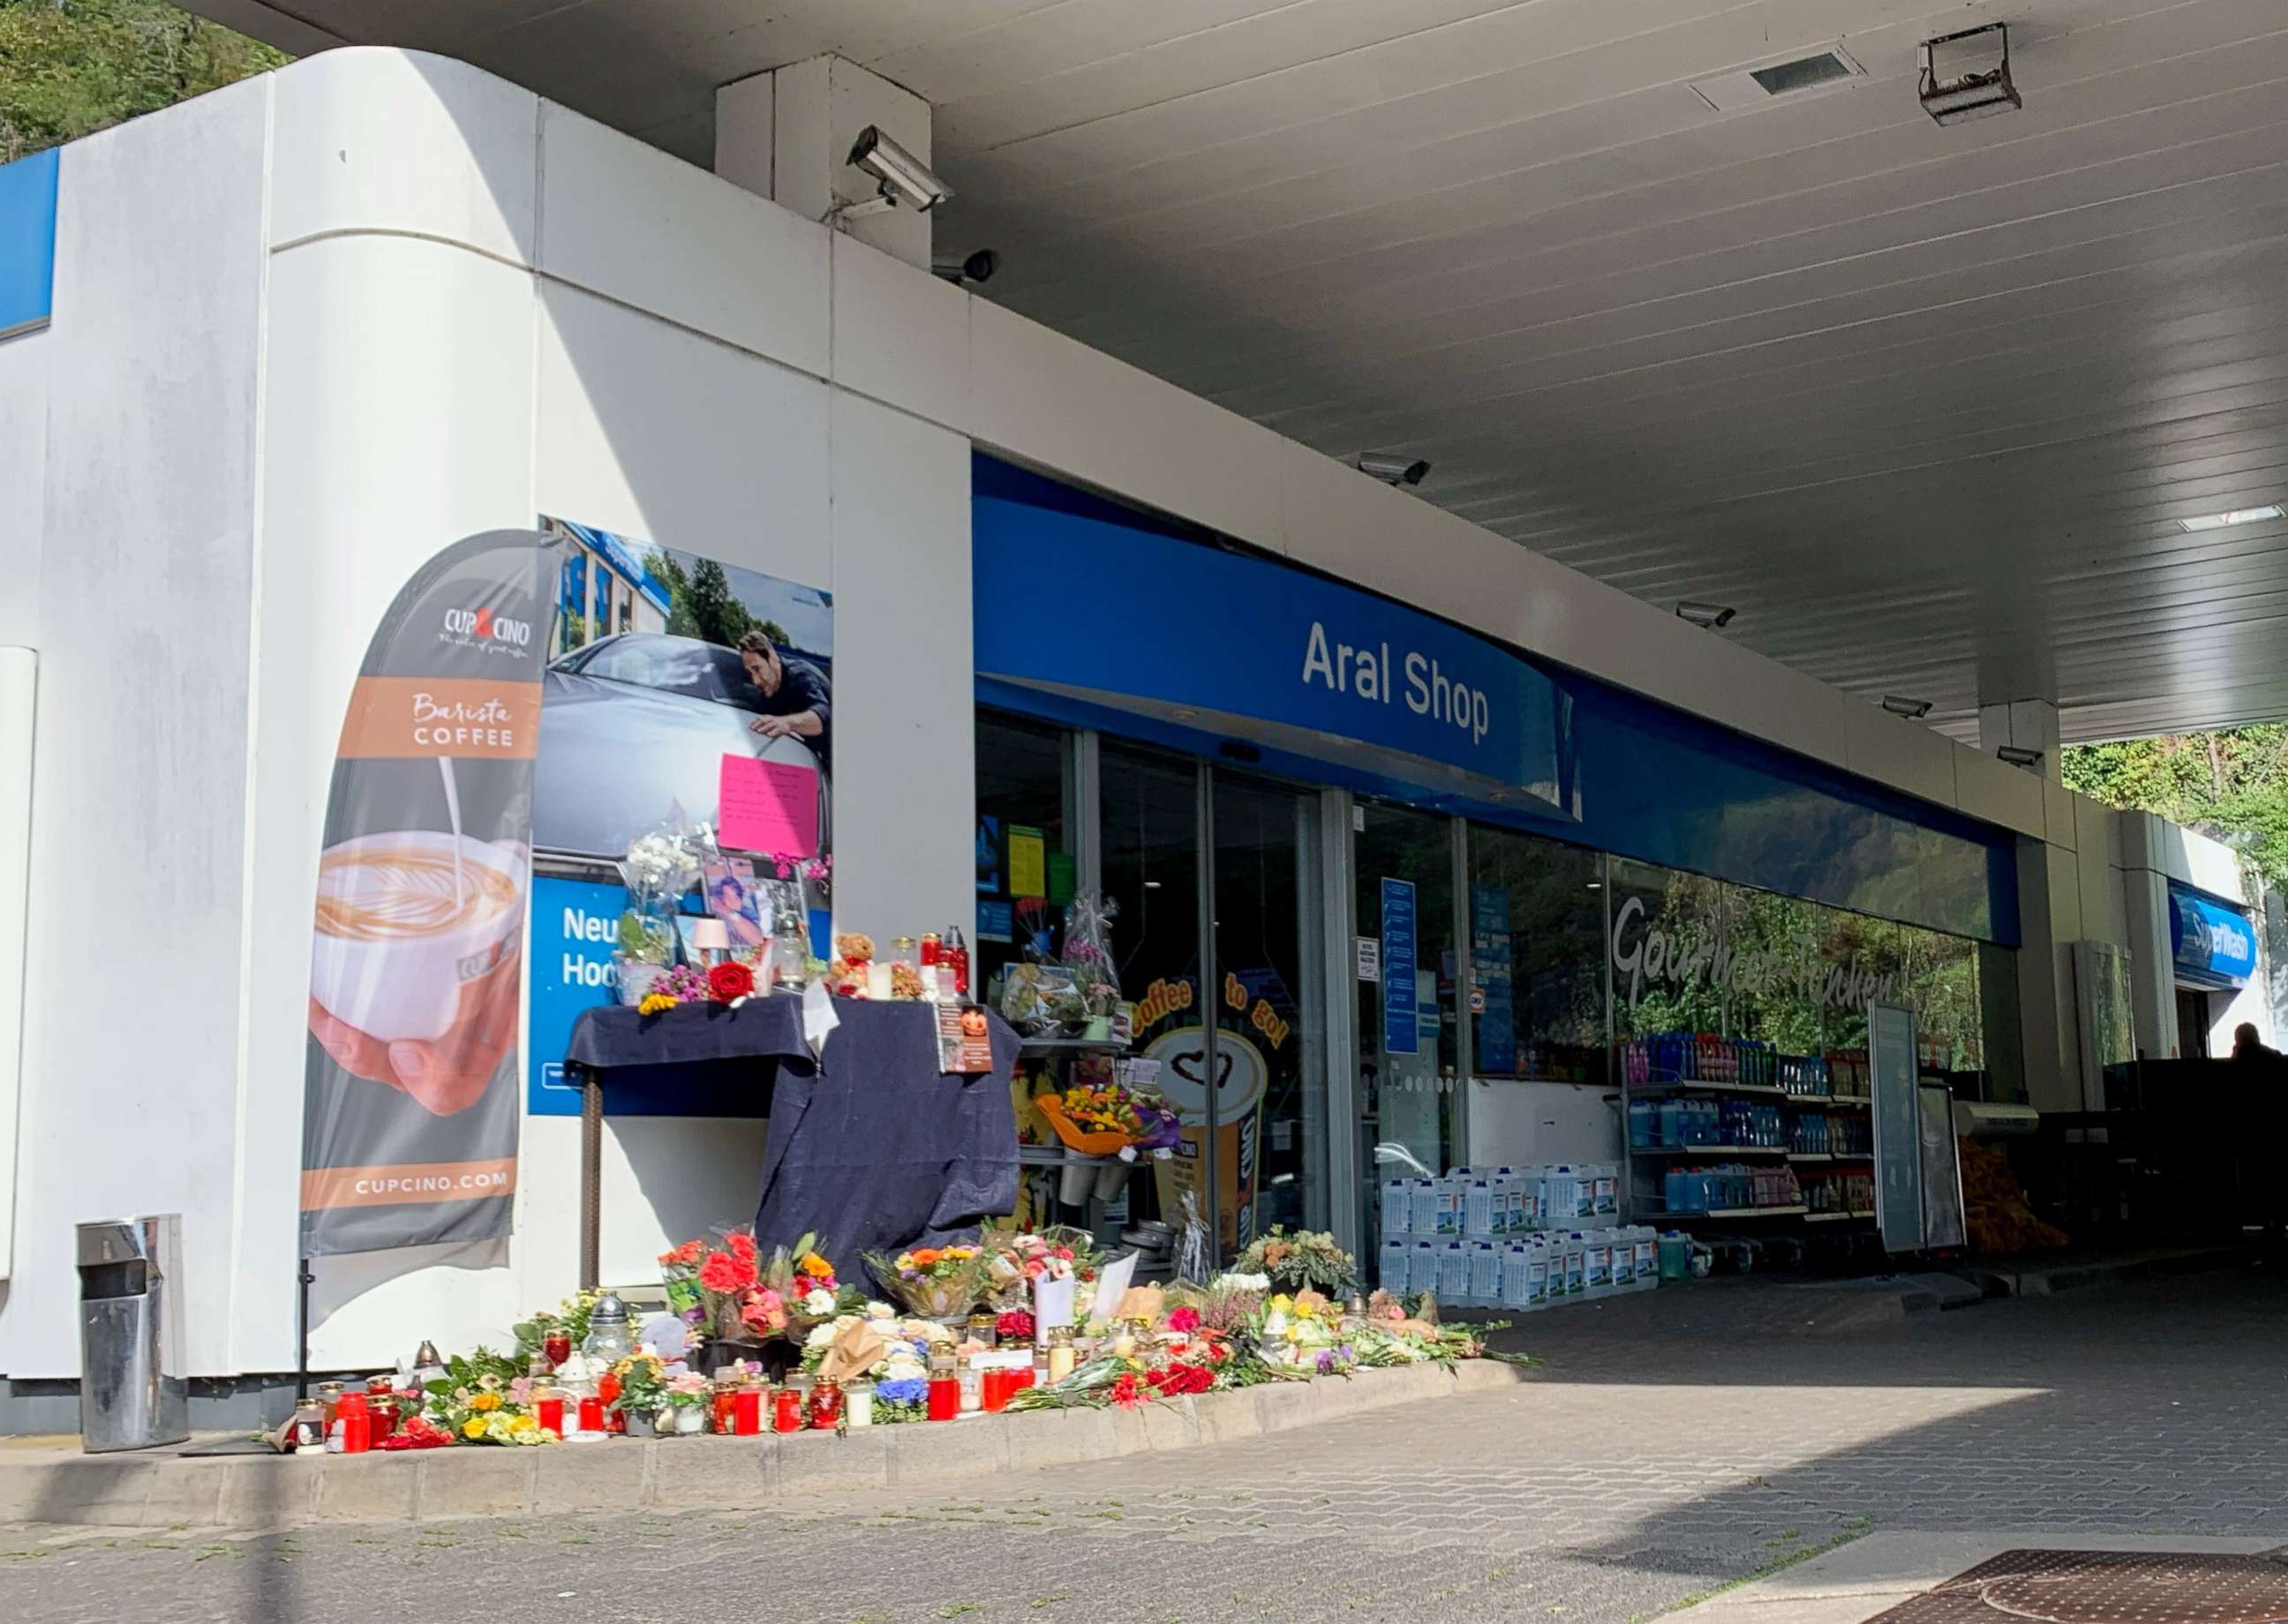 PHOTO: Flowers are placed in front of a gas station in Idar-Oberstein, Germany, Sept. 21, 2021.